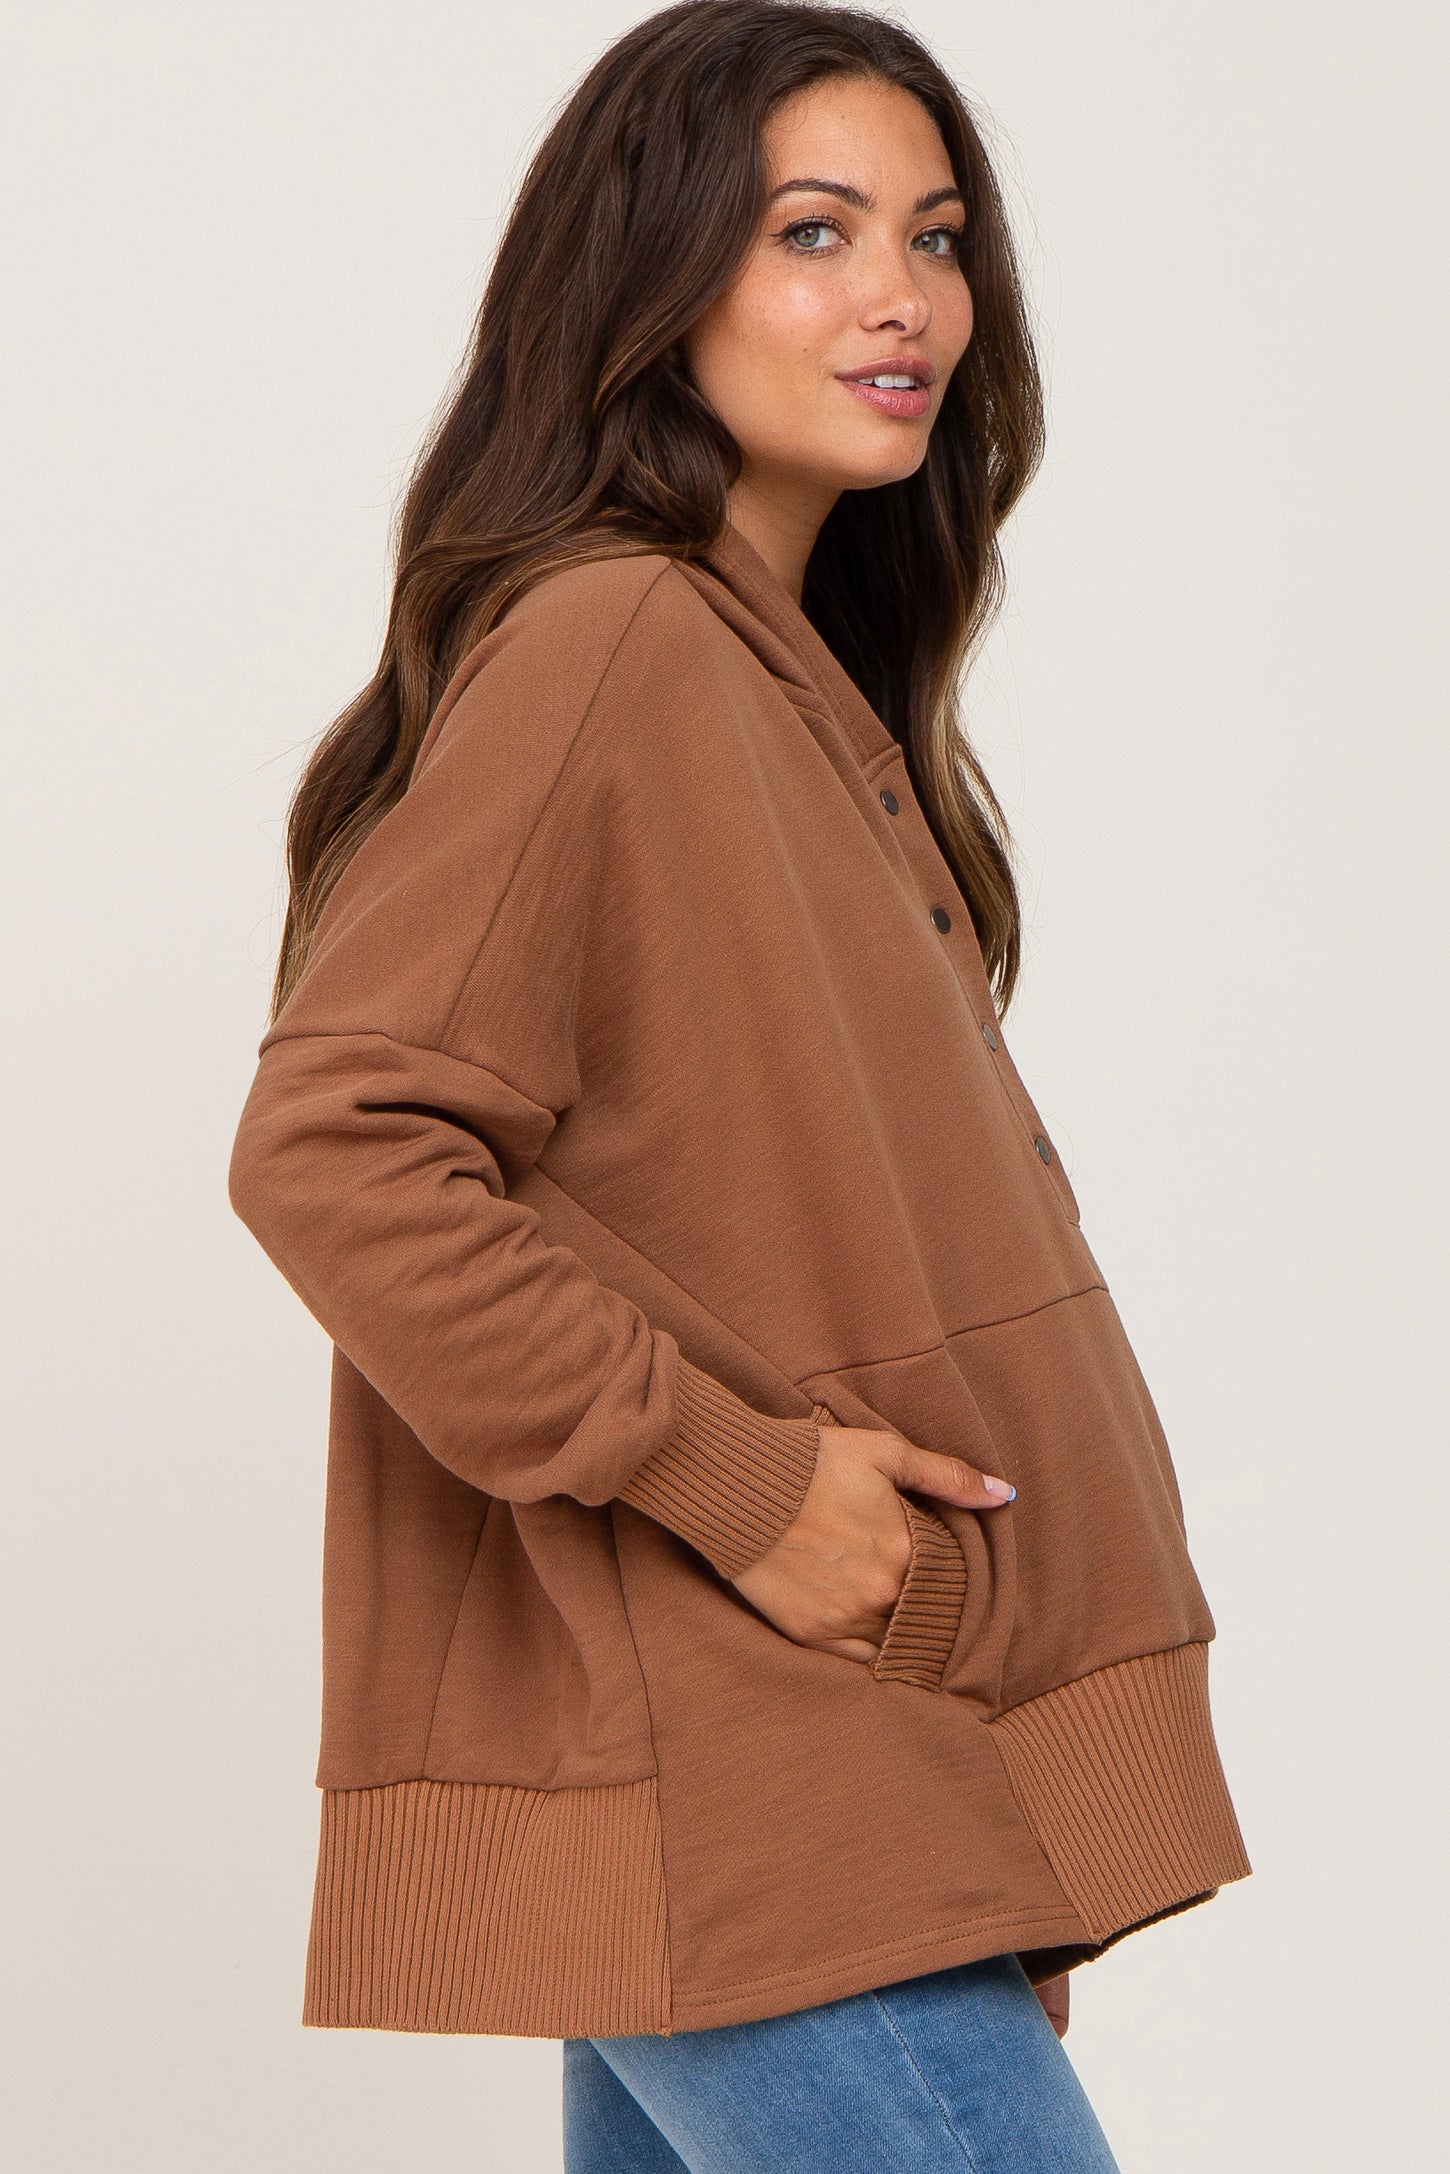 Camel Button Front Ribbed Trim Hooded Maternity Sweatshirt